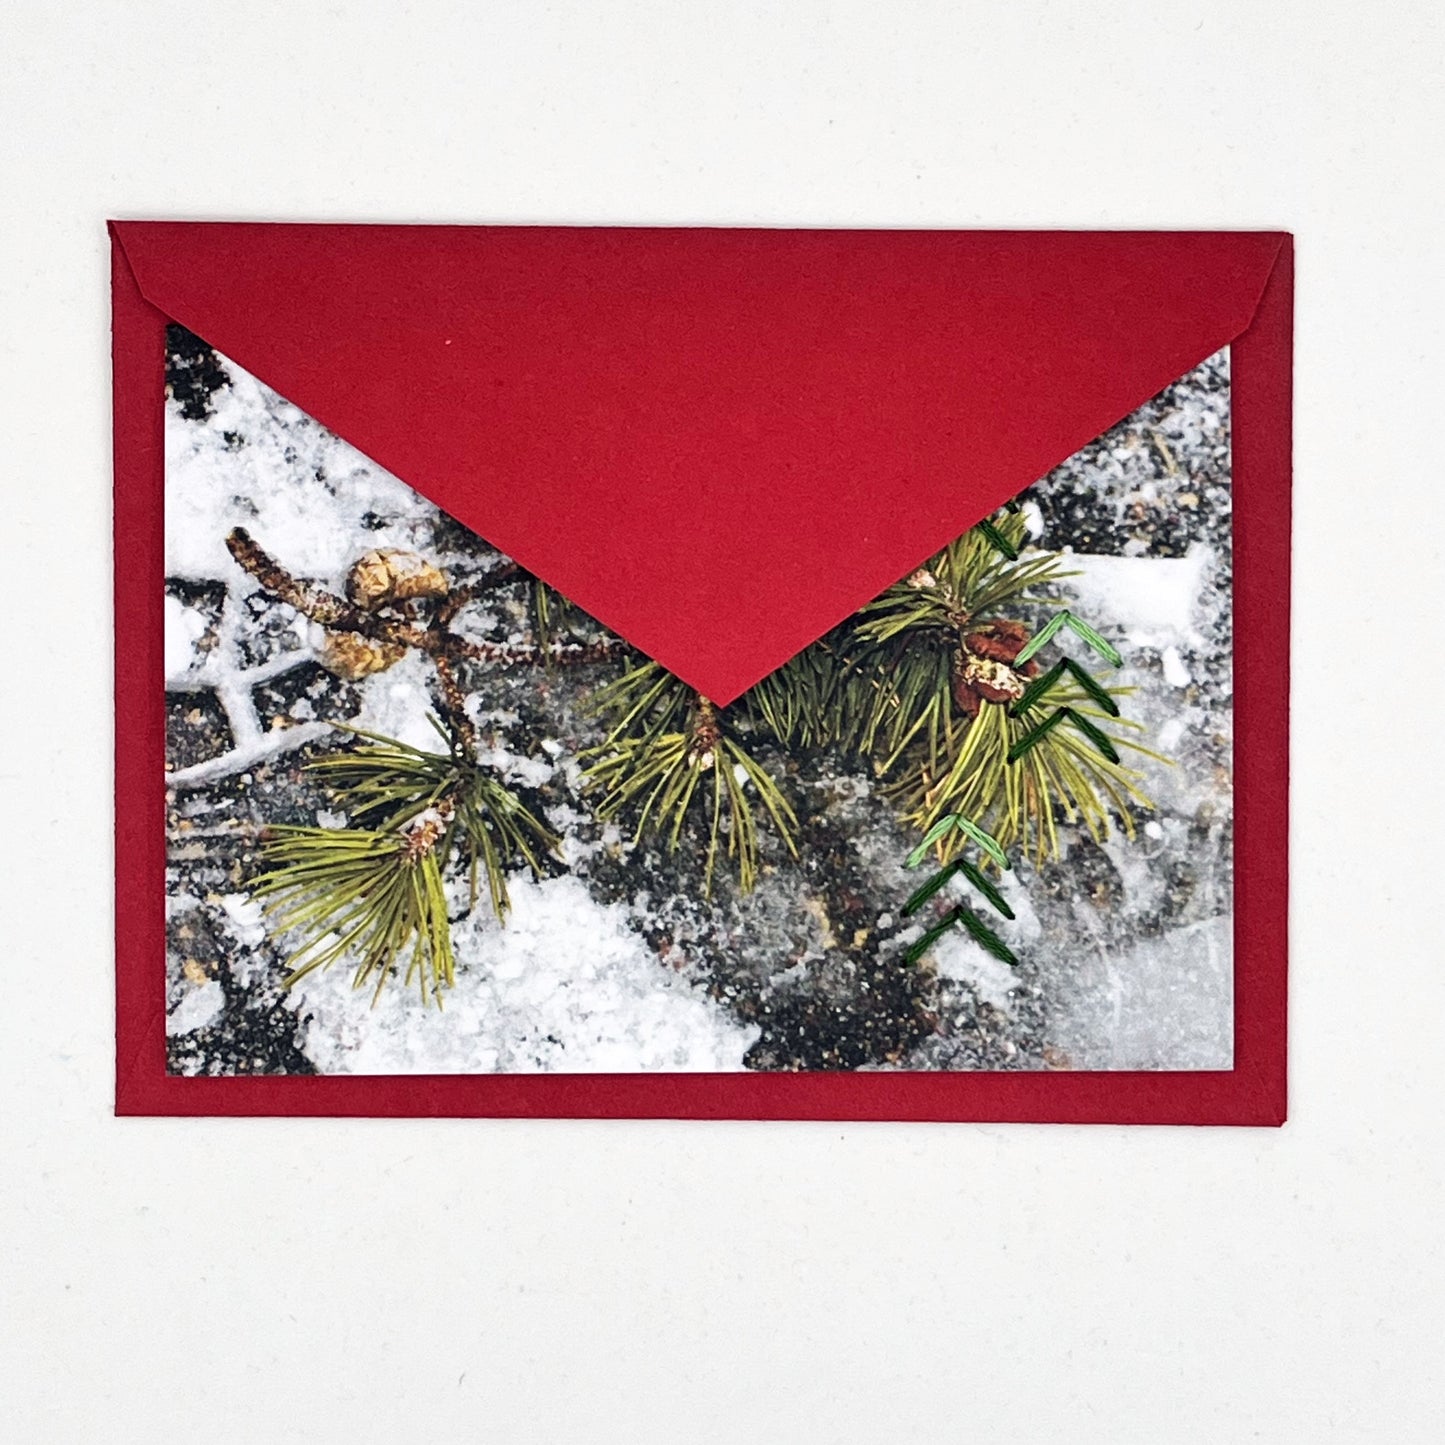 Greeting card flat on a red envelope, tucked under the flap. Photo of pine tree branch in snow. Green stitches of groups of 3 chevrons to create abstract pine tree shape